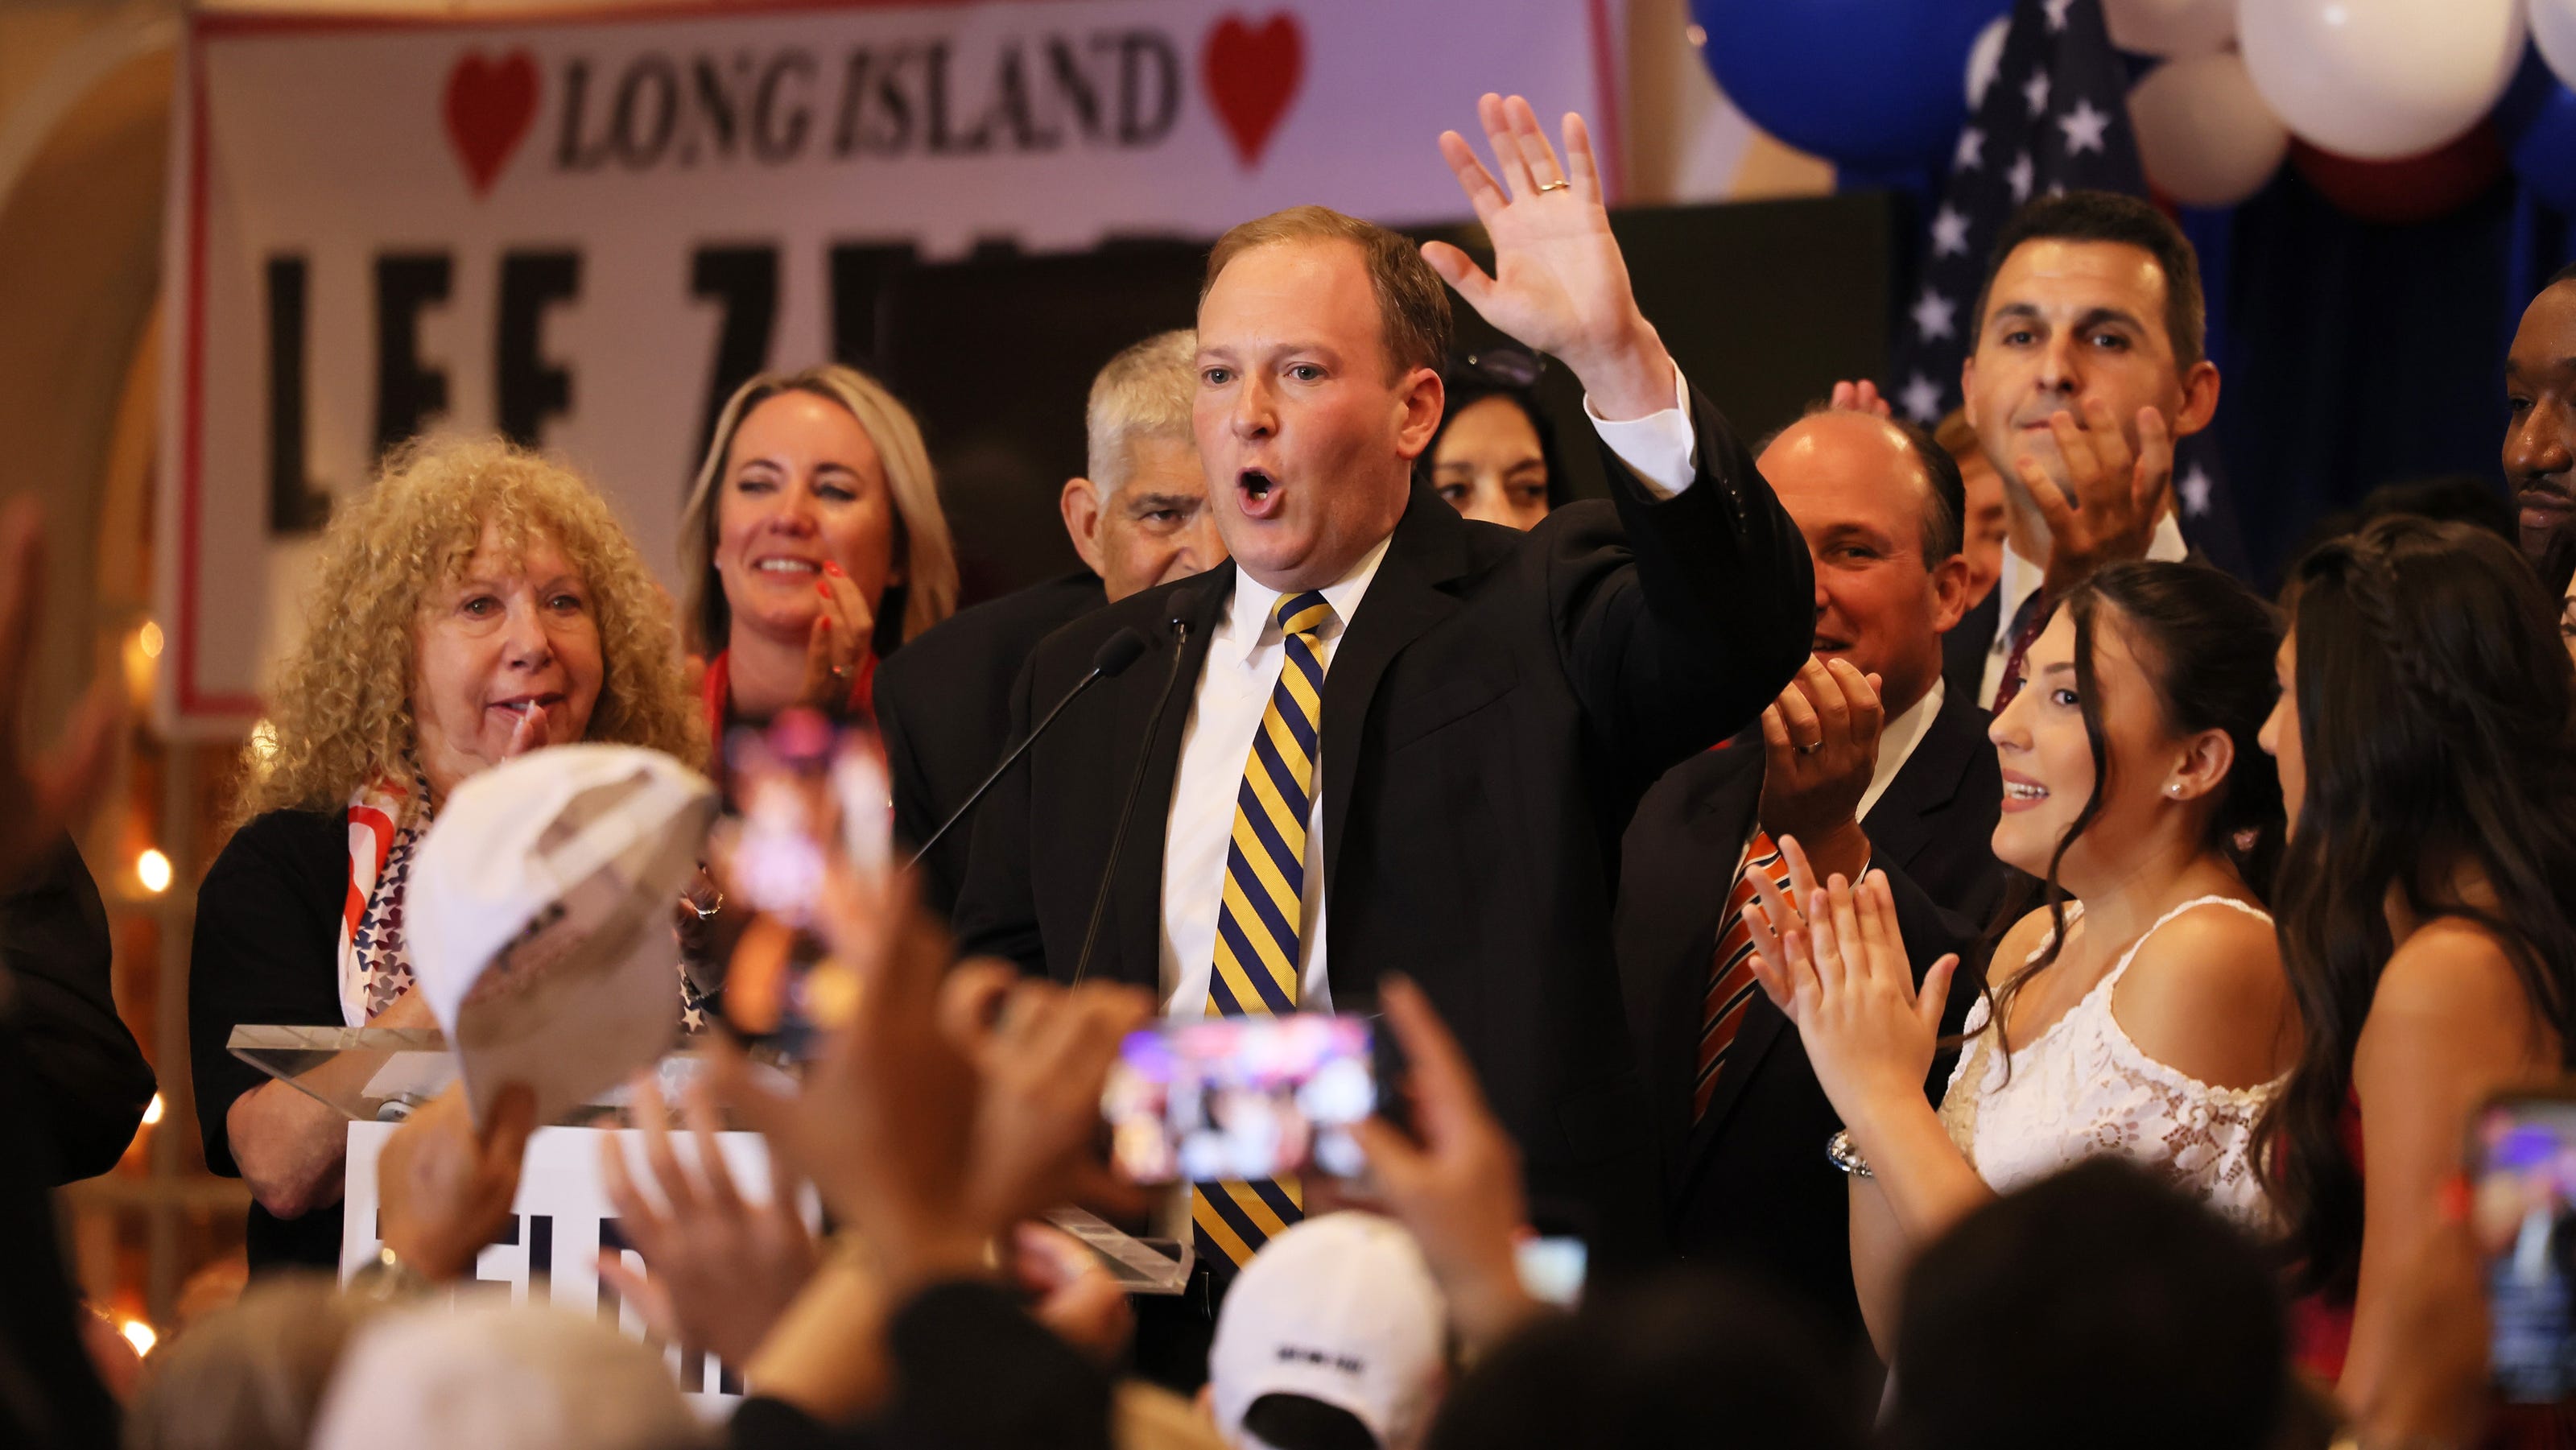 Lee Zeldin: What to know about the Republican in NY governor race